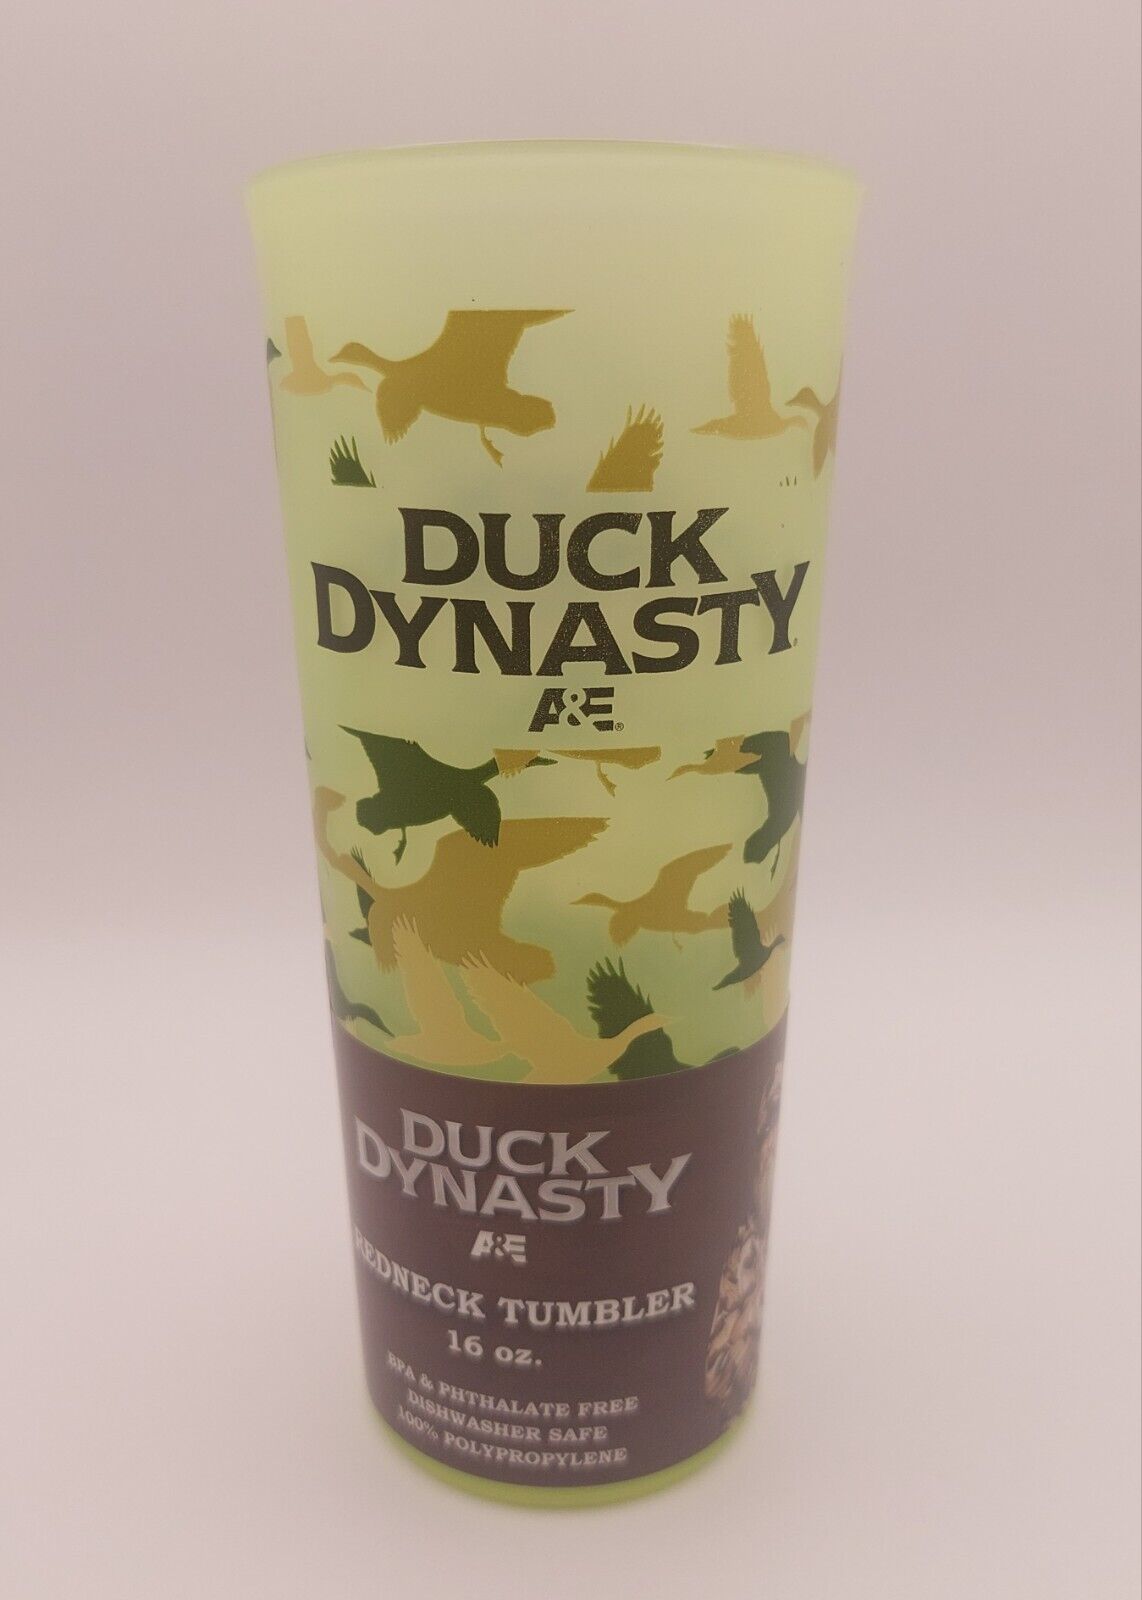 2013 Duck Dynasty A&E Green Camouflage Redneck Tumbler Cup 16 oz Plastic NEW